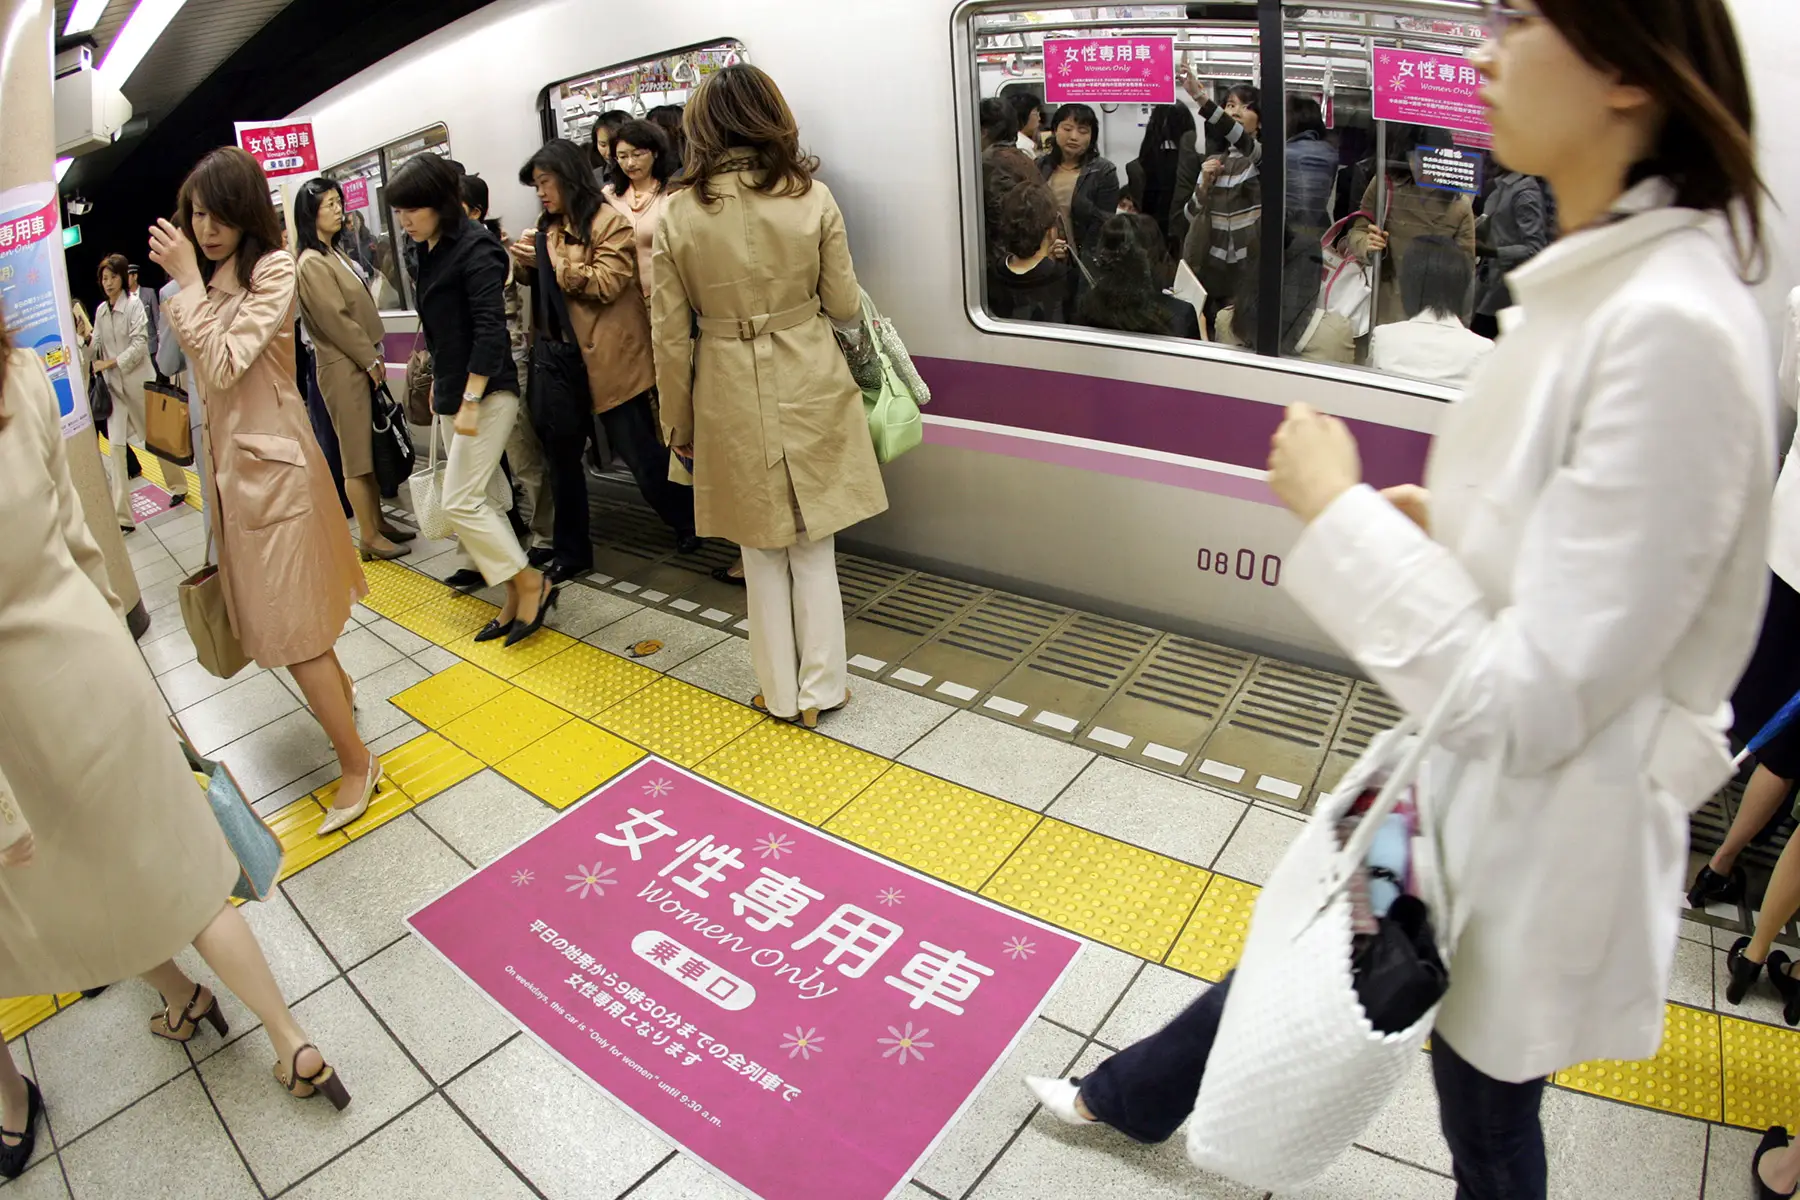 Women-only subway car in Tokyo 